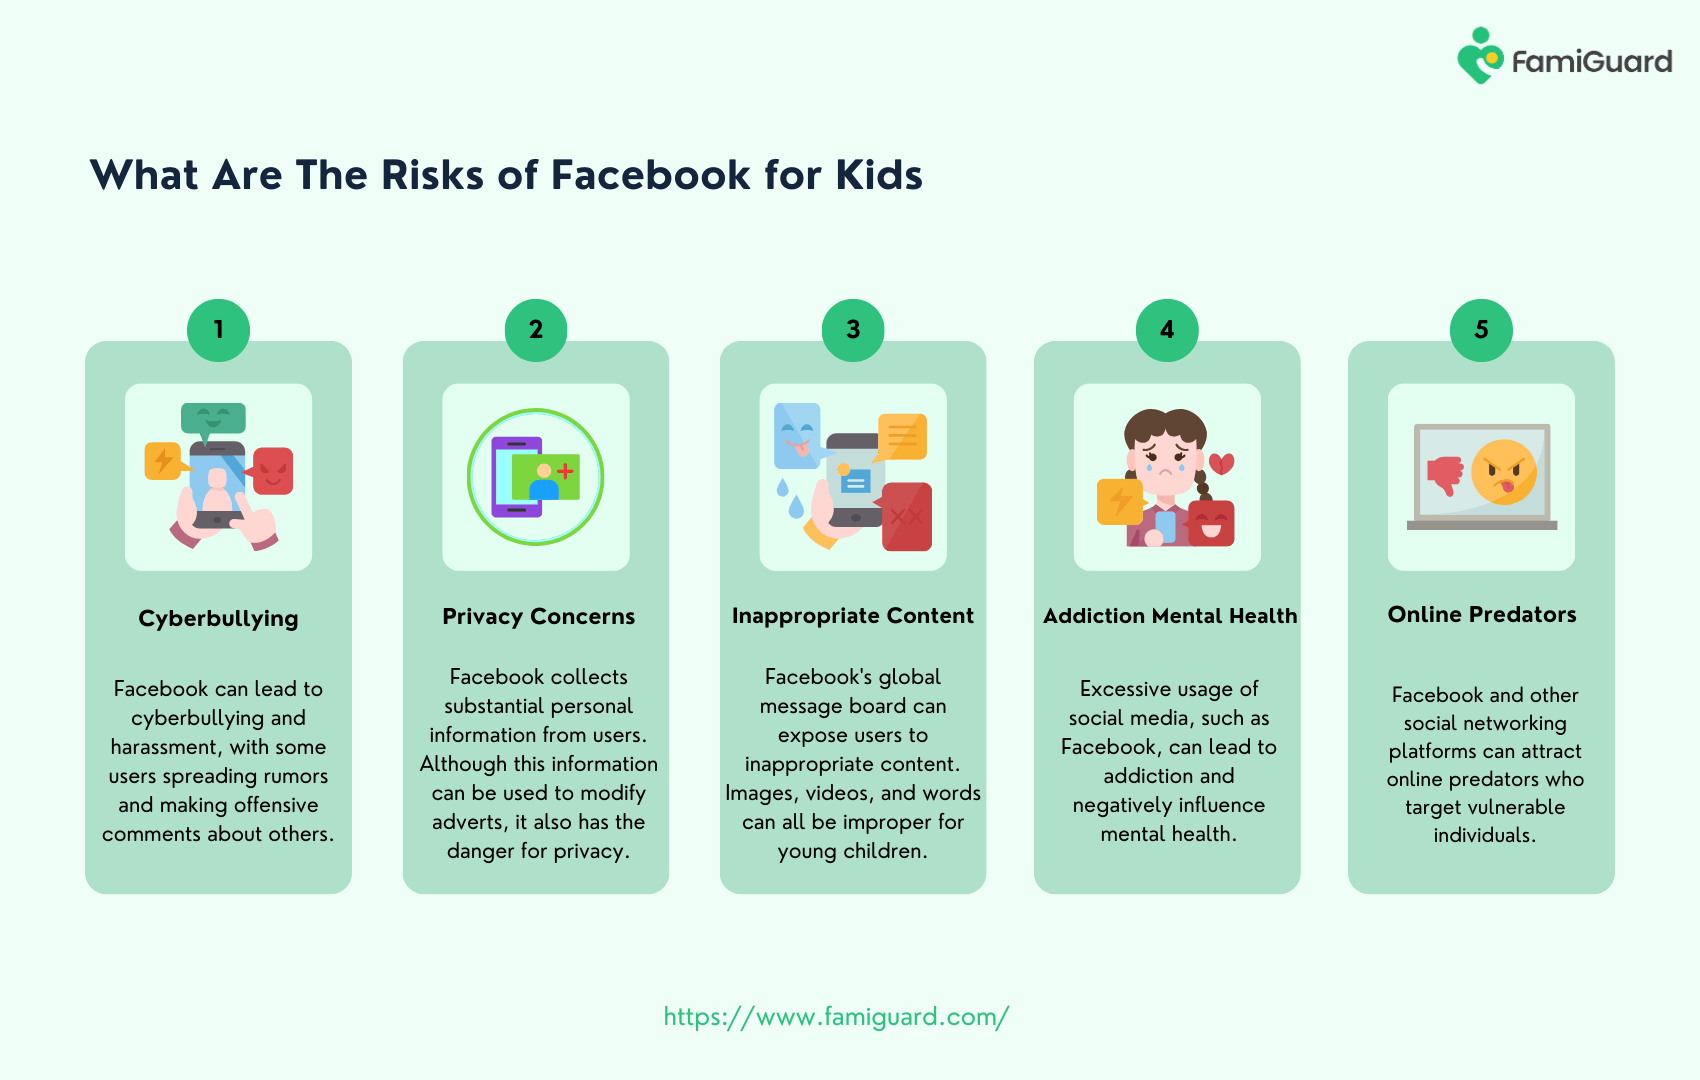 What Are The Risks of Facebook for Kids